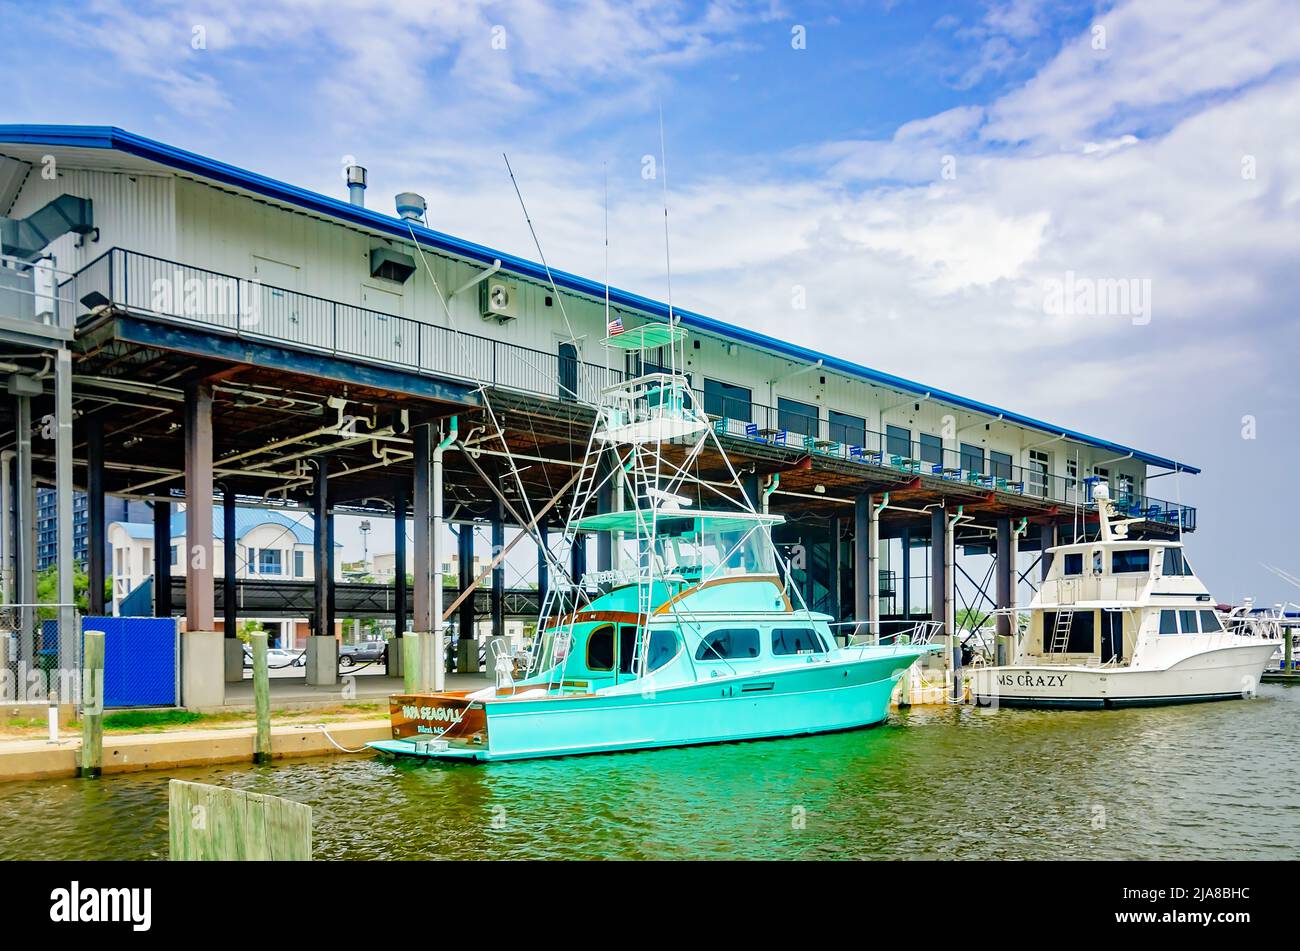 Luxury yachts are docked outside McElroy’s Harbor House Restaurant, May 11, 2022, in Biloxi, Mississippi. Stock Photo